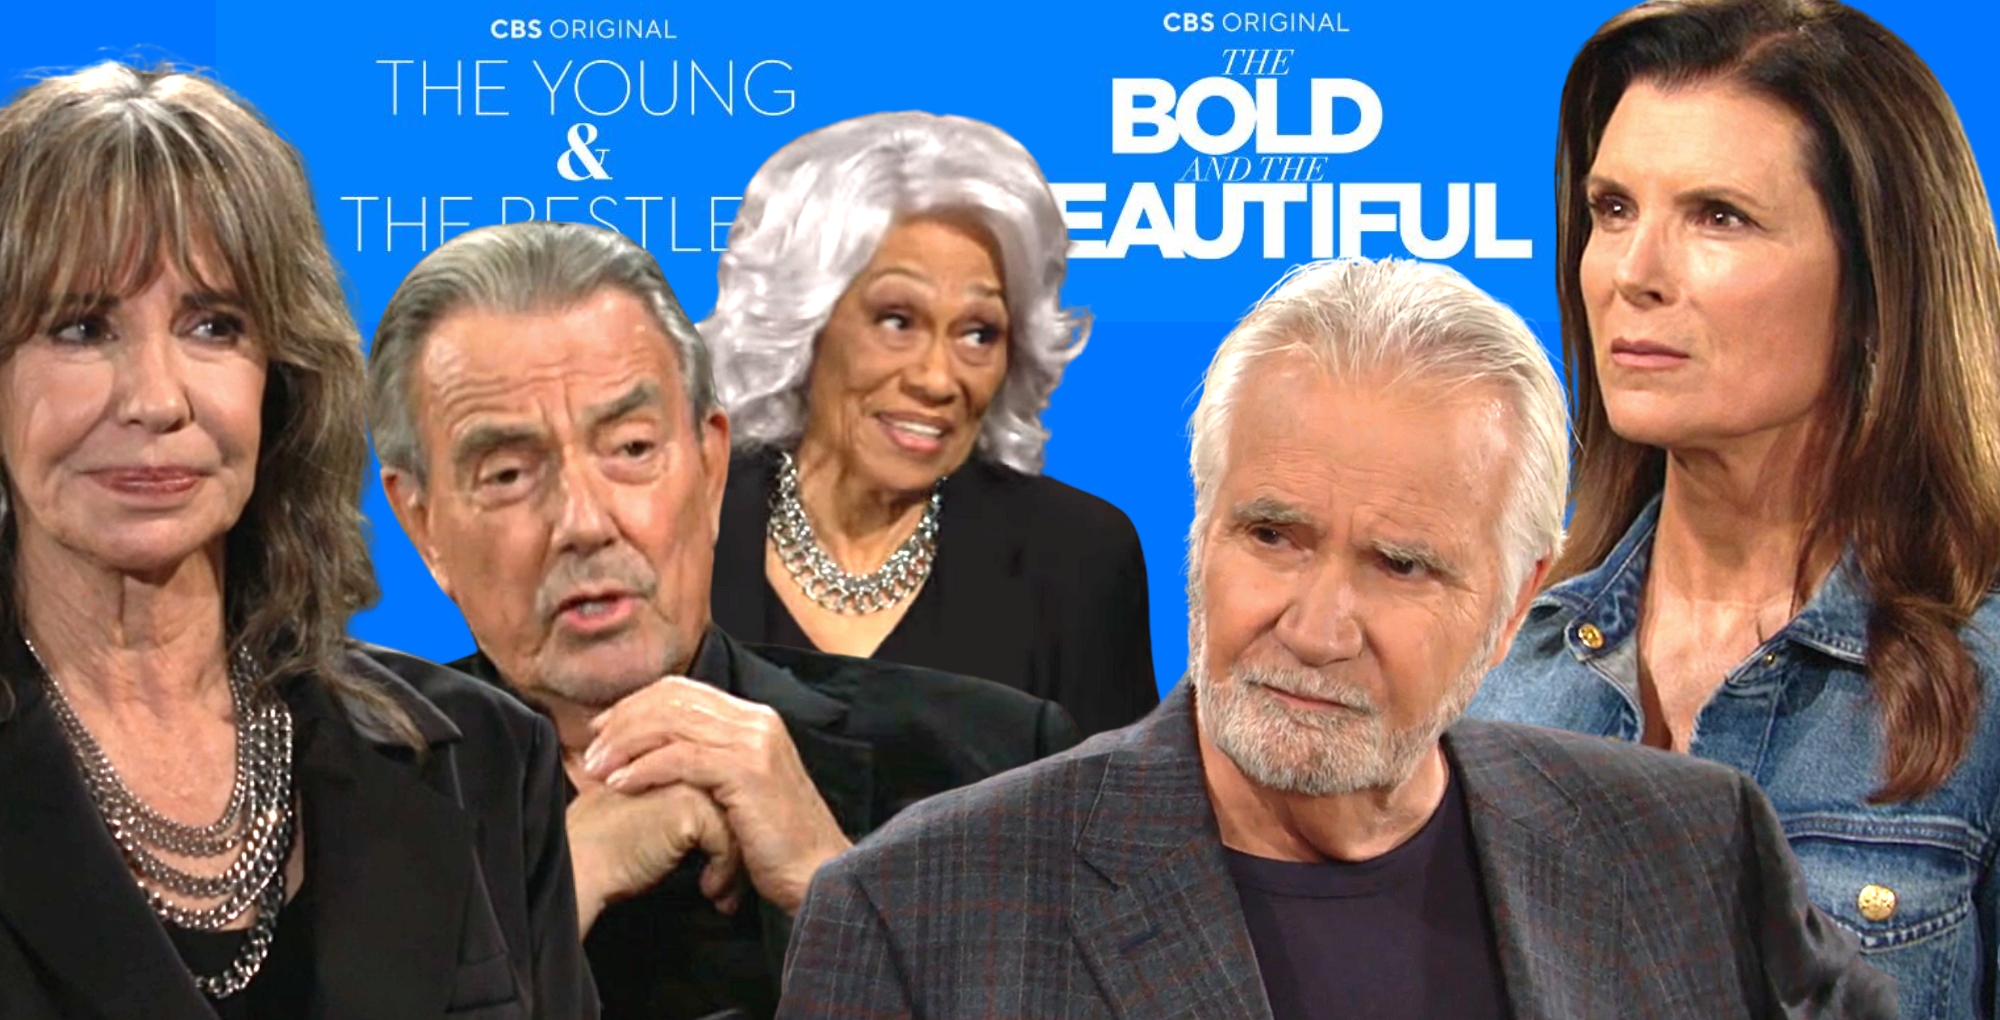 jill, victor, mamie, eric and sheila for young and the restless and bold and the beautiful.